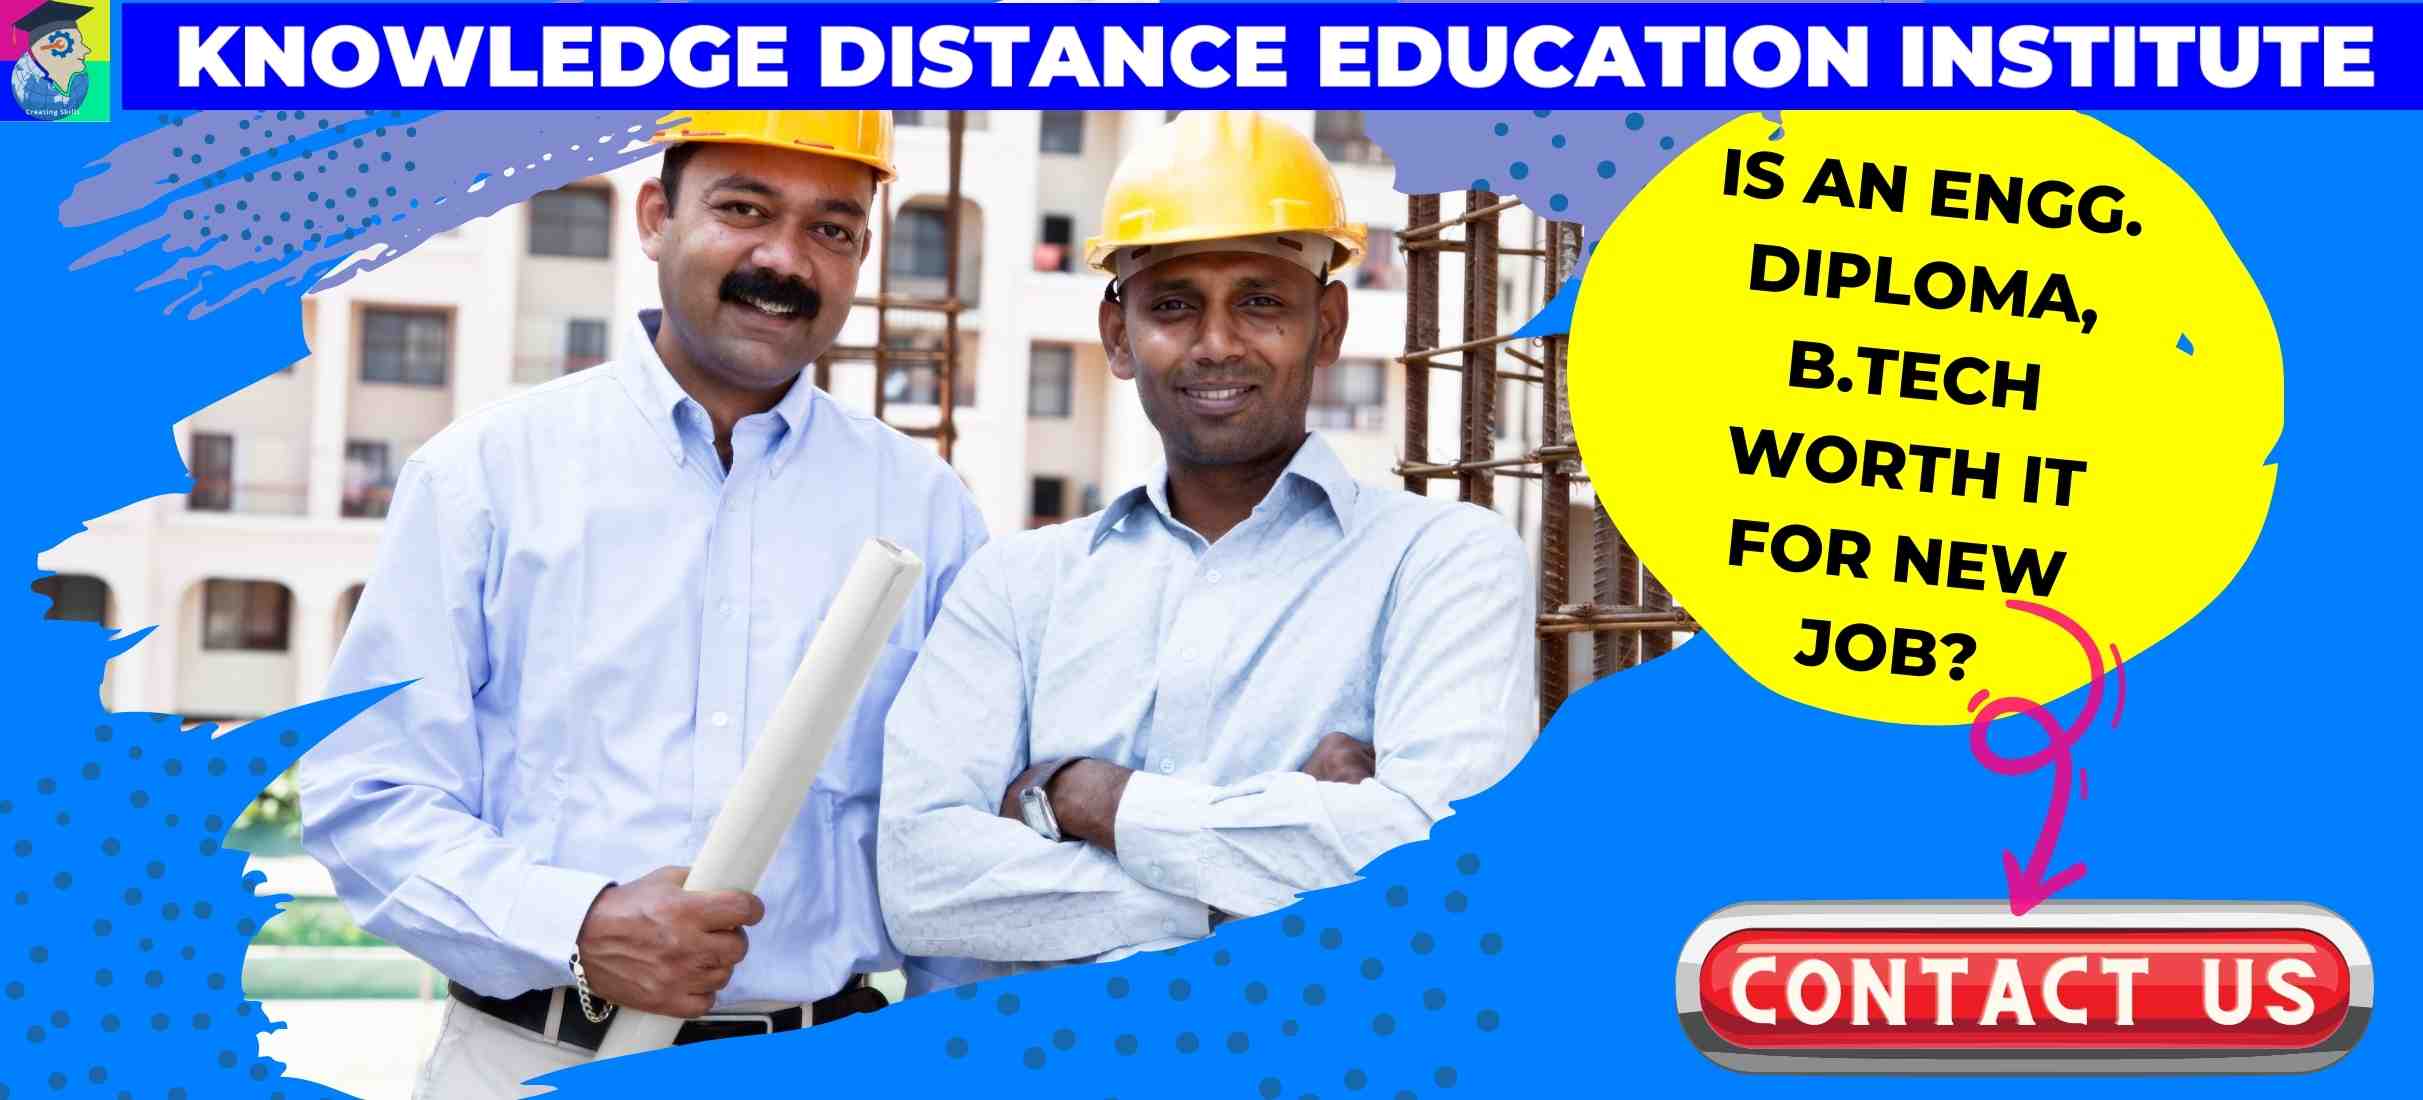 Part-time engineering courses is the only option for working people in India. Few Universities offer such courses. For career guidance you may contact Knowedge Distance Education Institute on +91 9029020524